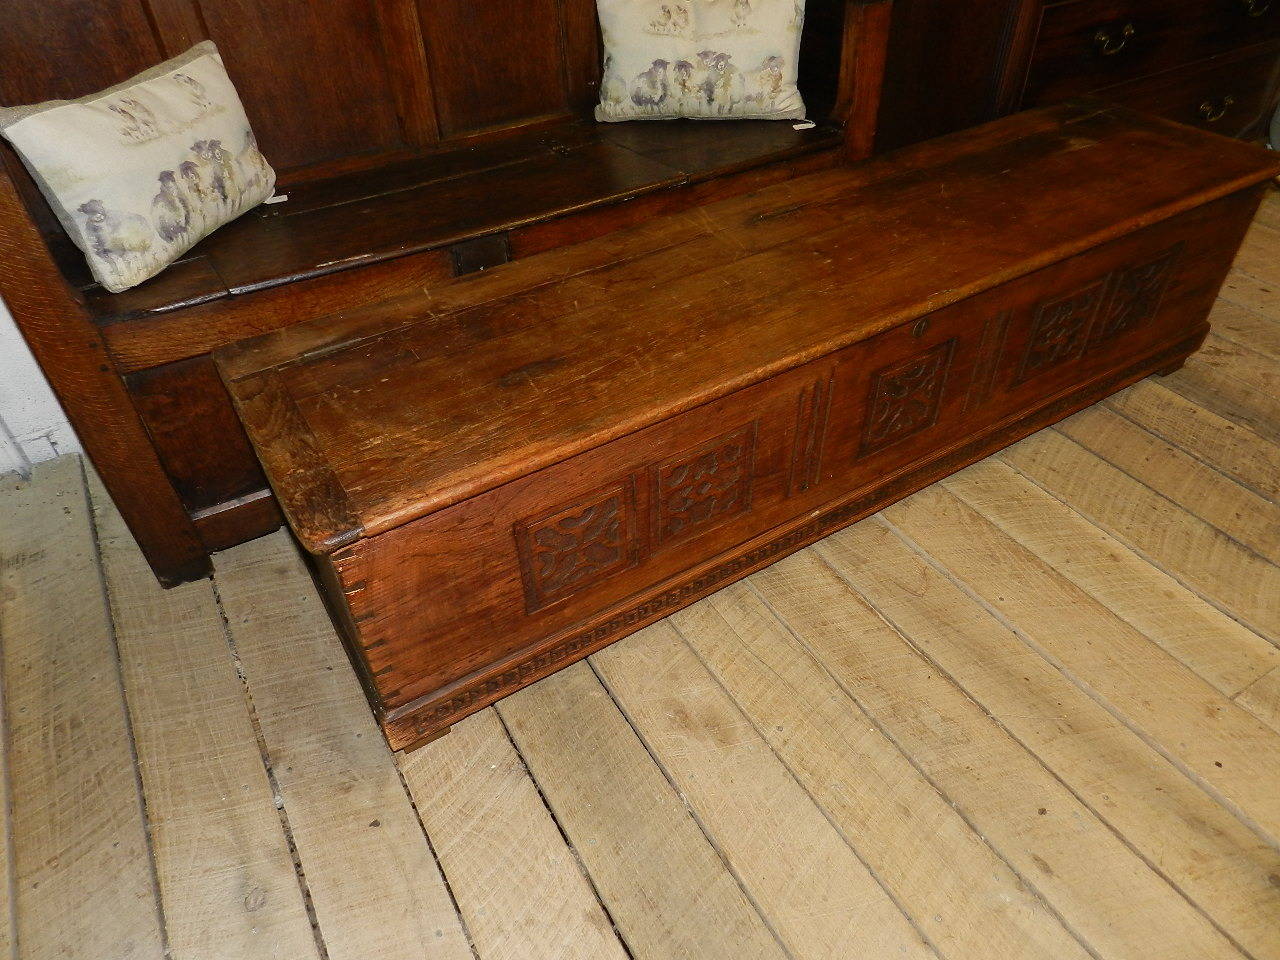 Antique pine coffer with carved detail and dovetailed joints.